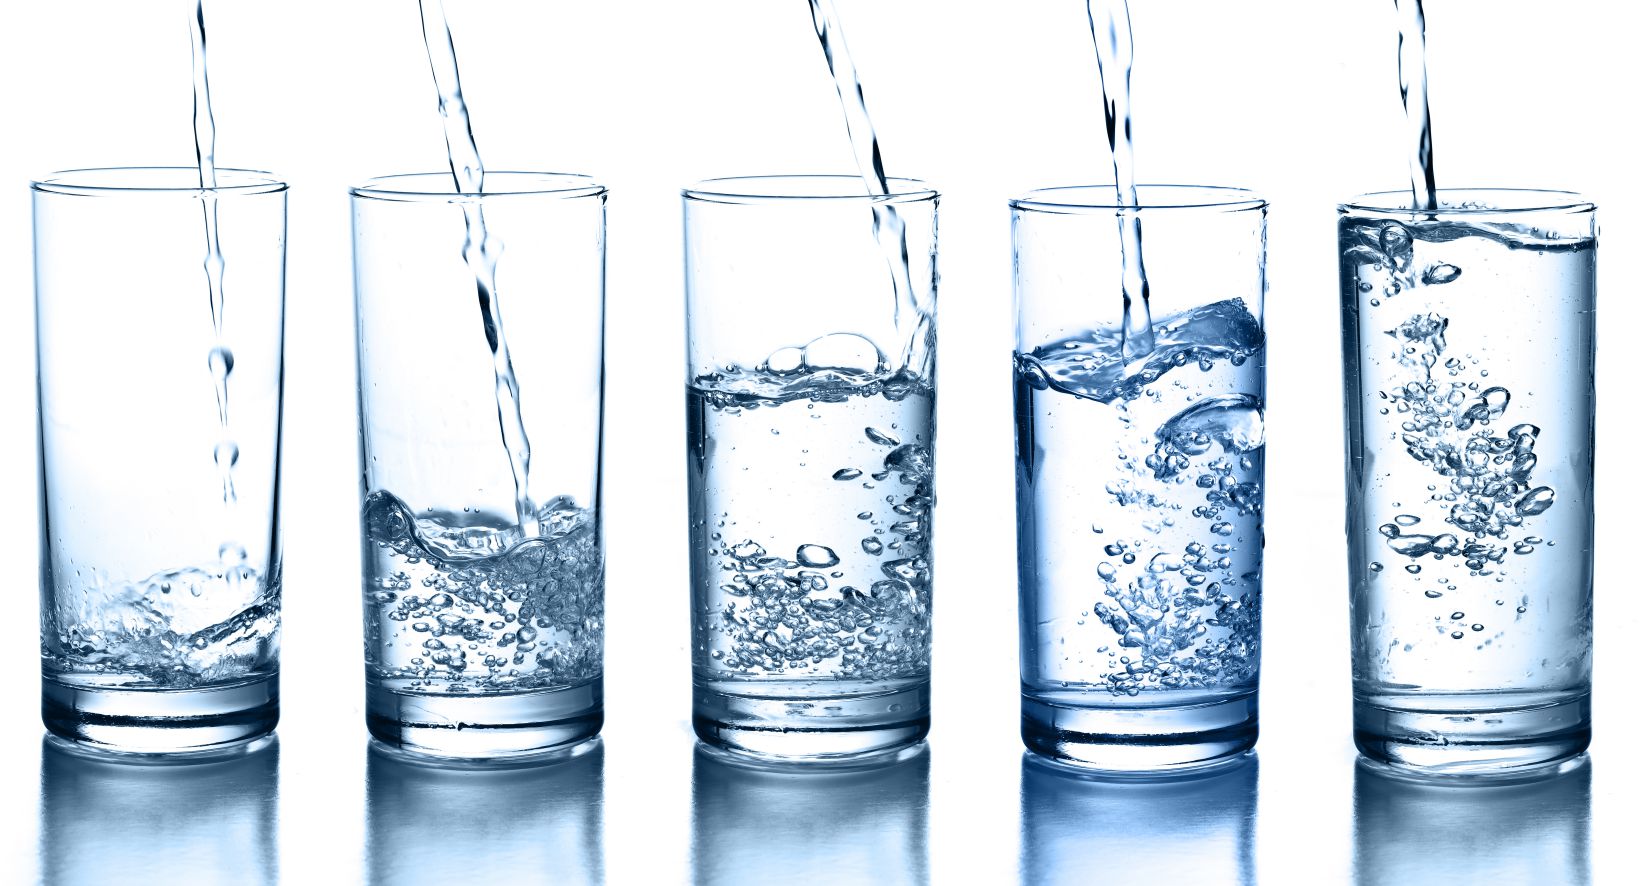 water fasting image